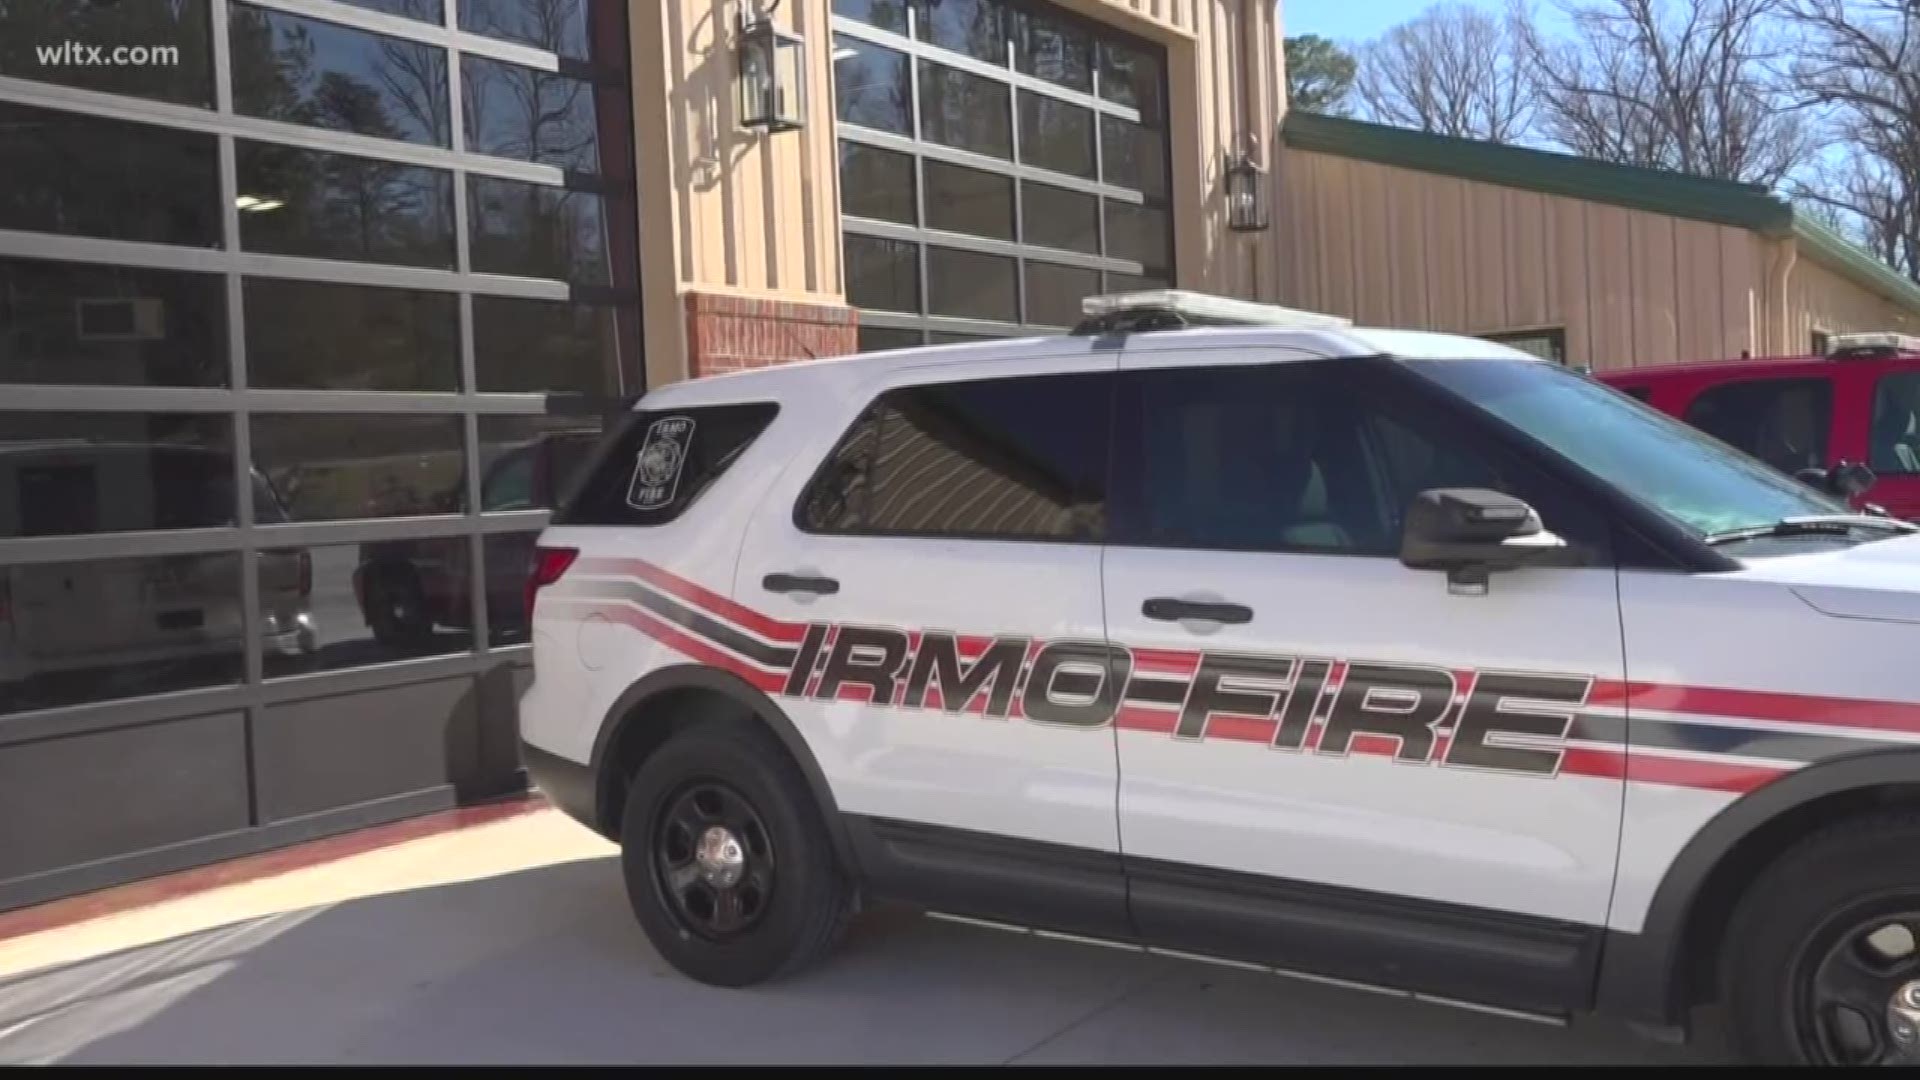 The Irmo Fire District is getting ready to open this brand new station but they need your help to stock their shelves.